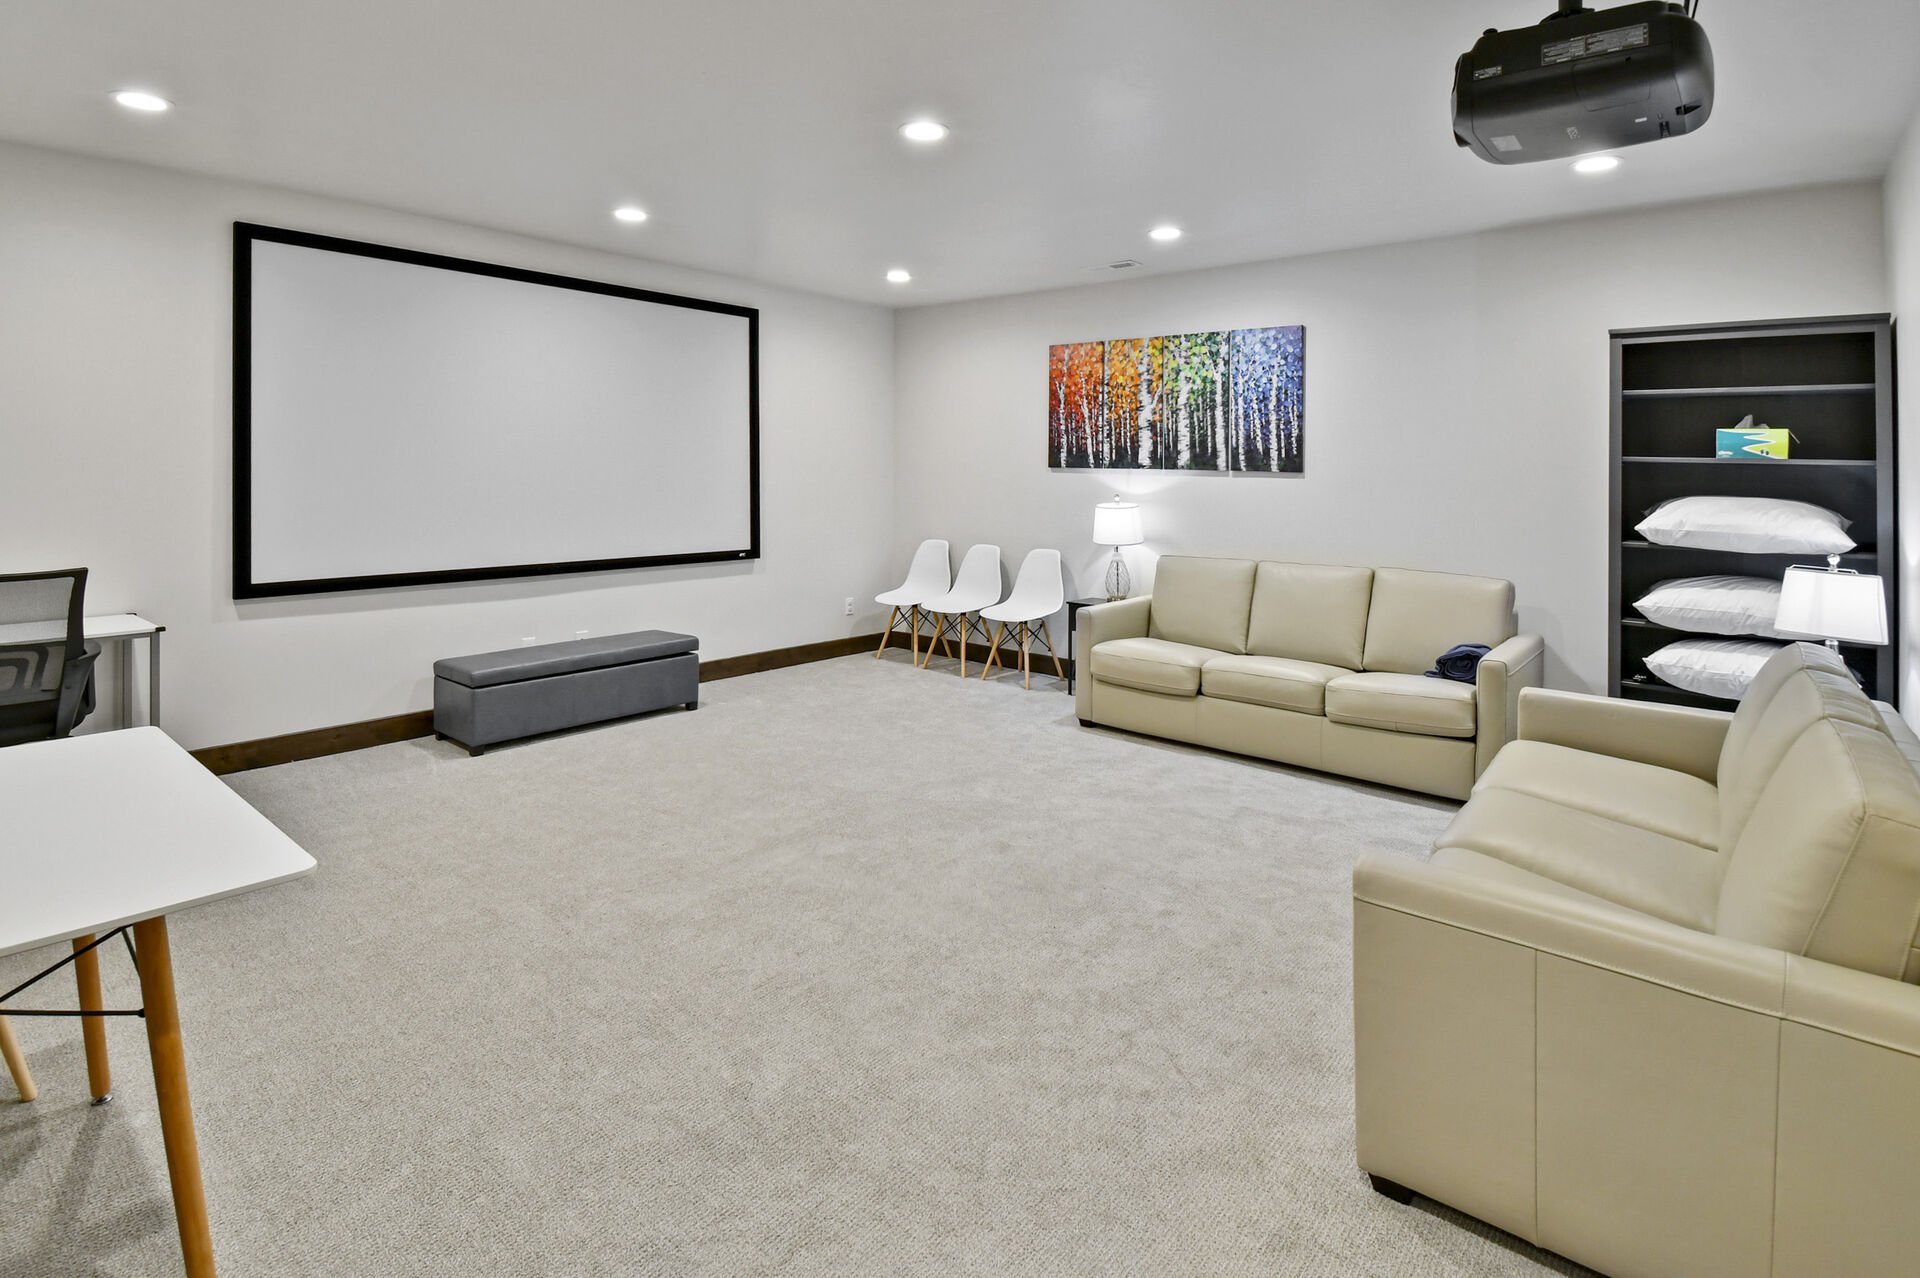 Downstairs Theater room with professional projector